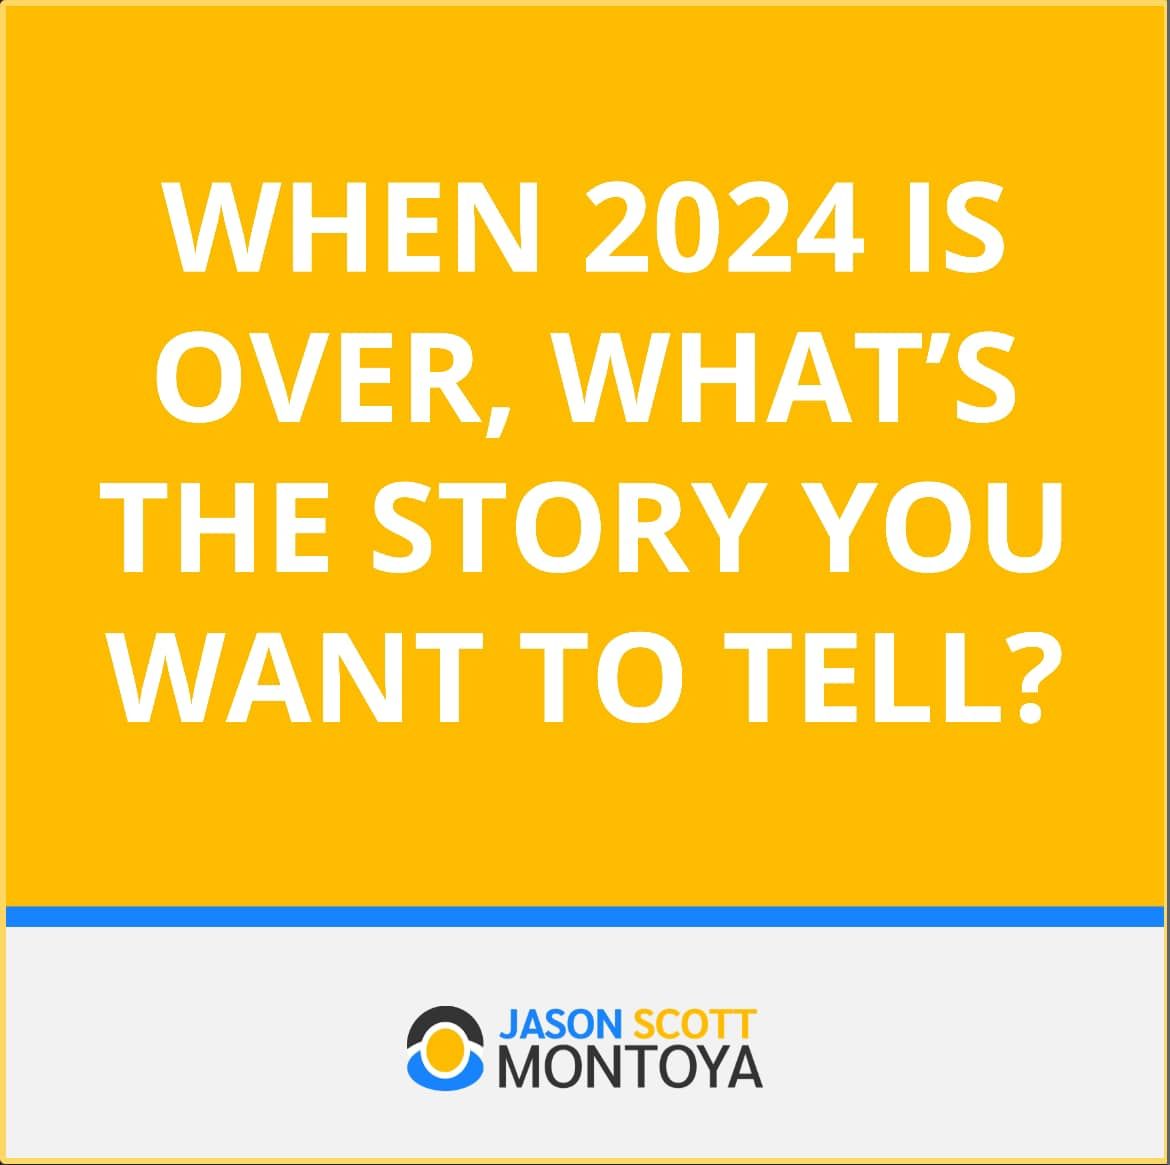 2024 is here. What’s you vision for the year? Dreams? Goals?